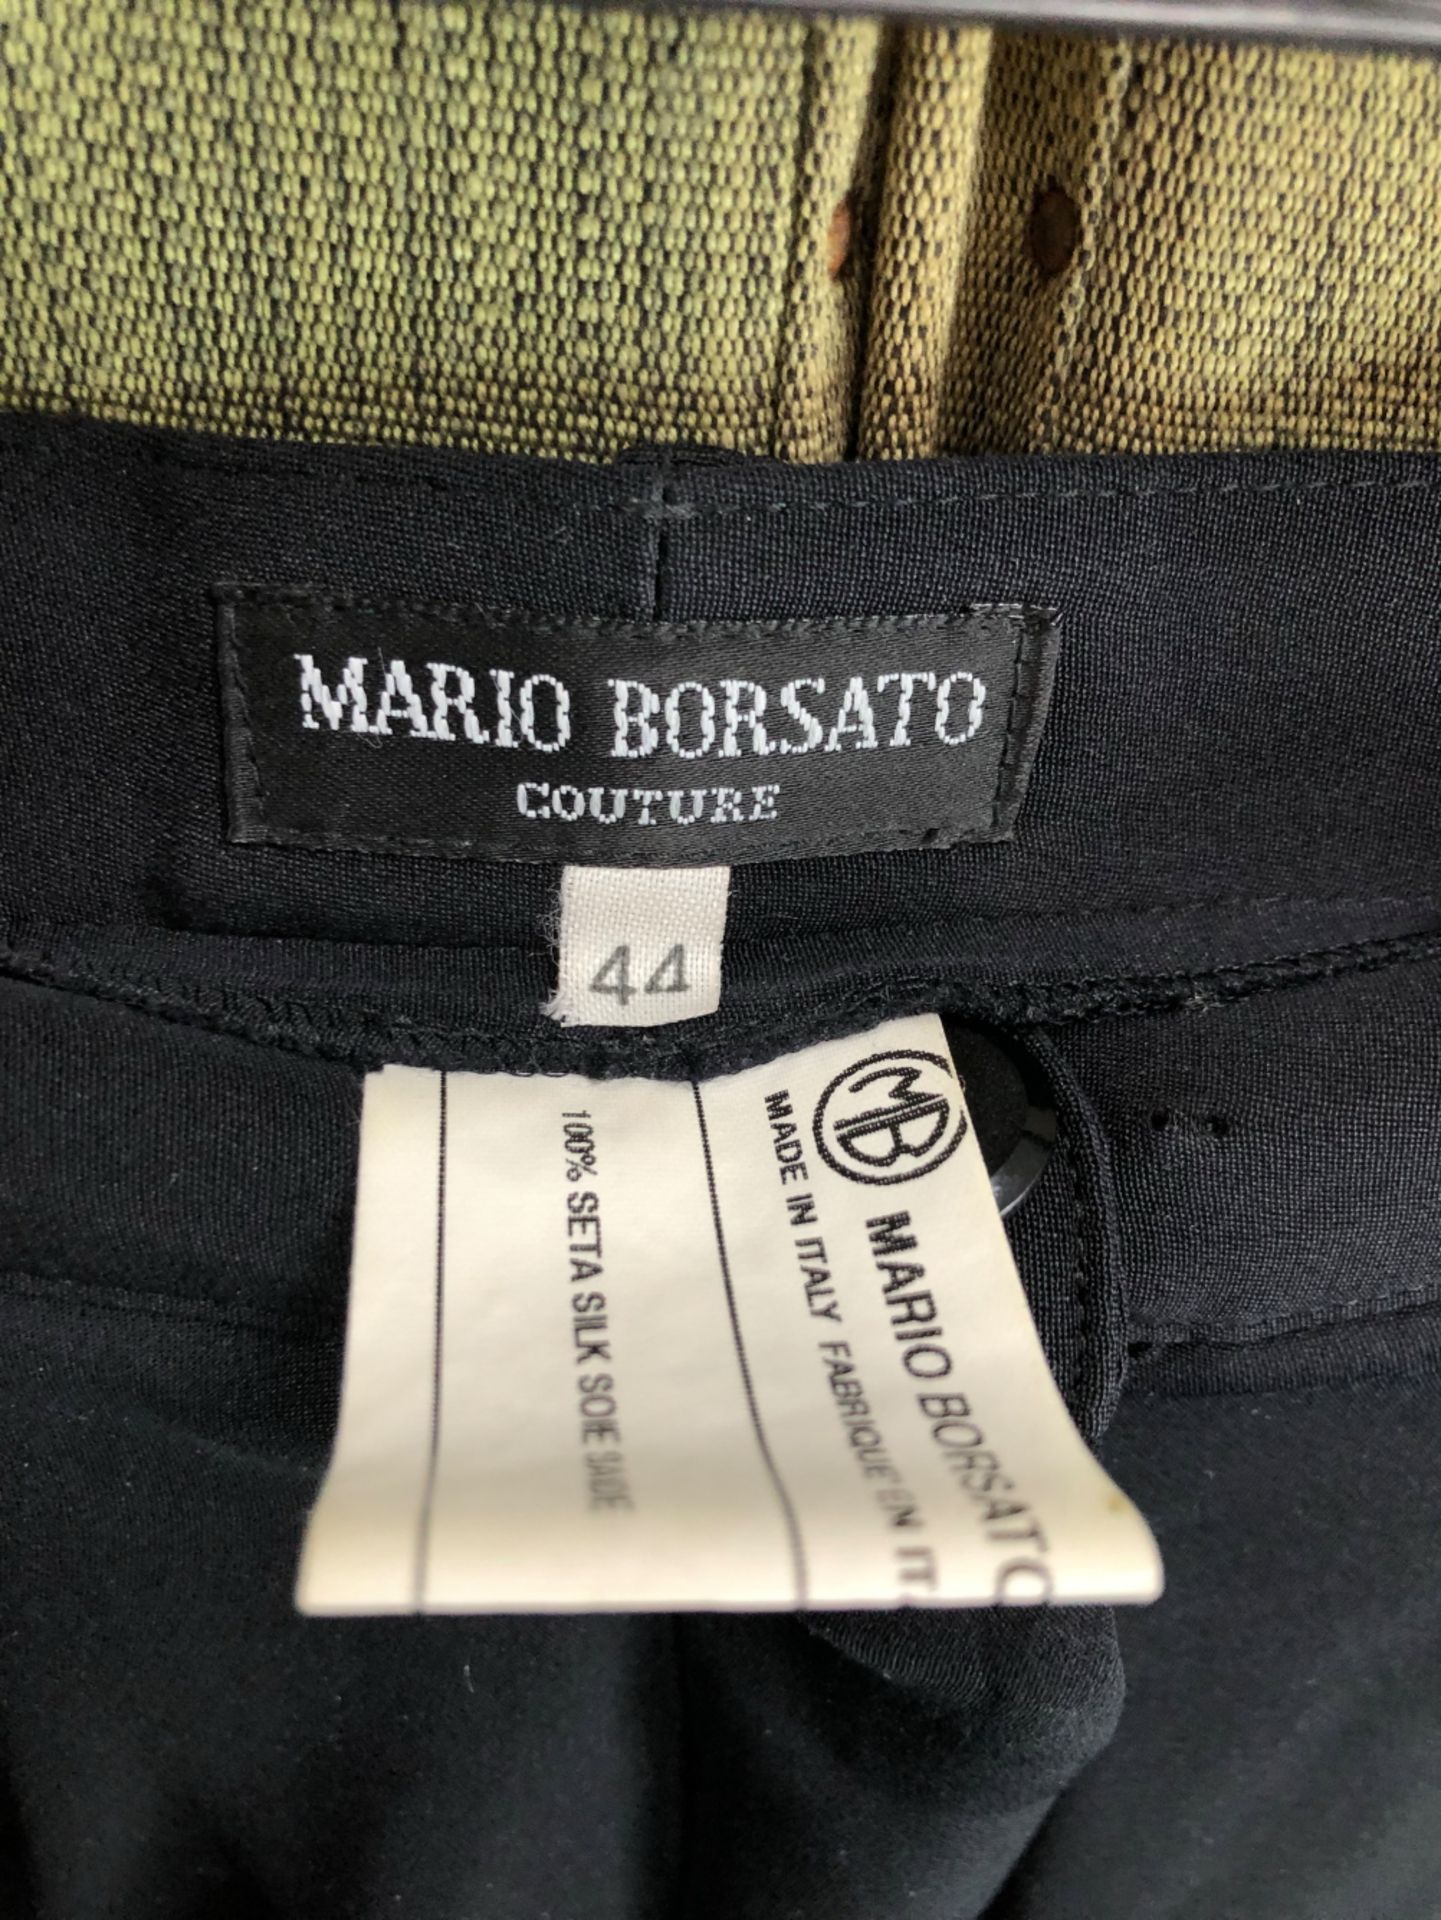 A PAIR OF WIDE LEGGED BLACK TROUSERS BY MARIO BORSATO COUTURE SIZE 44 AND A BLACK MARIO BORSATO - Image 19 of 25